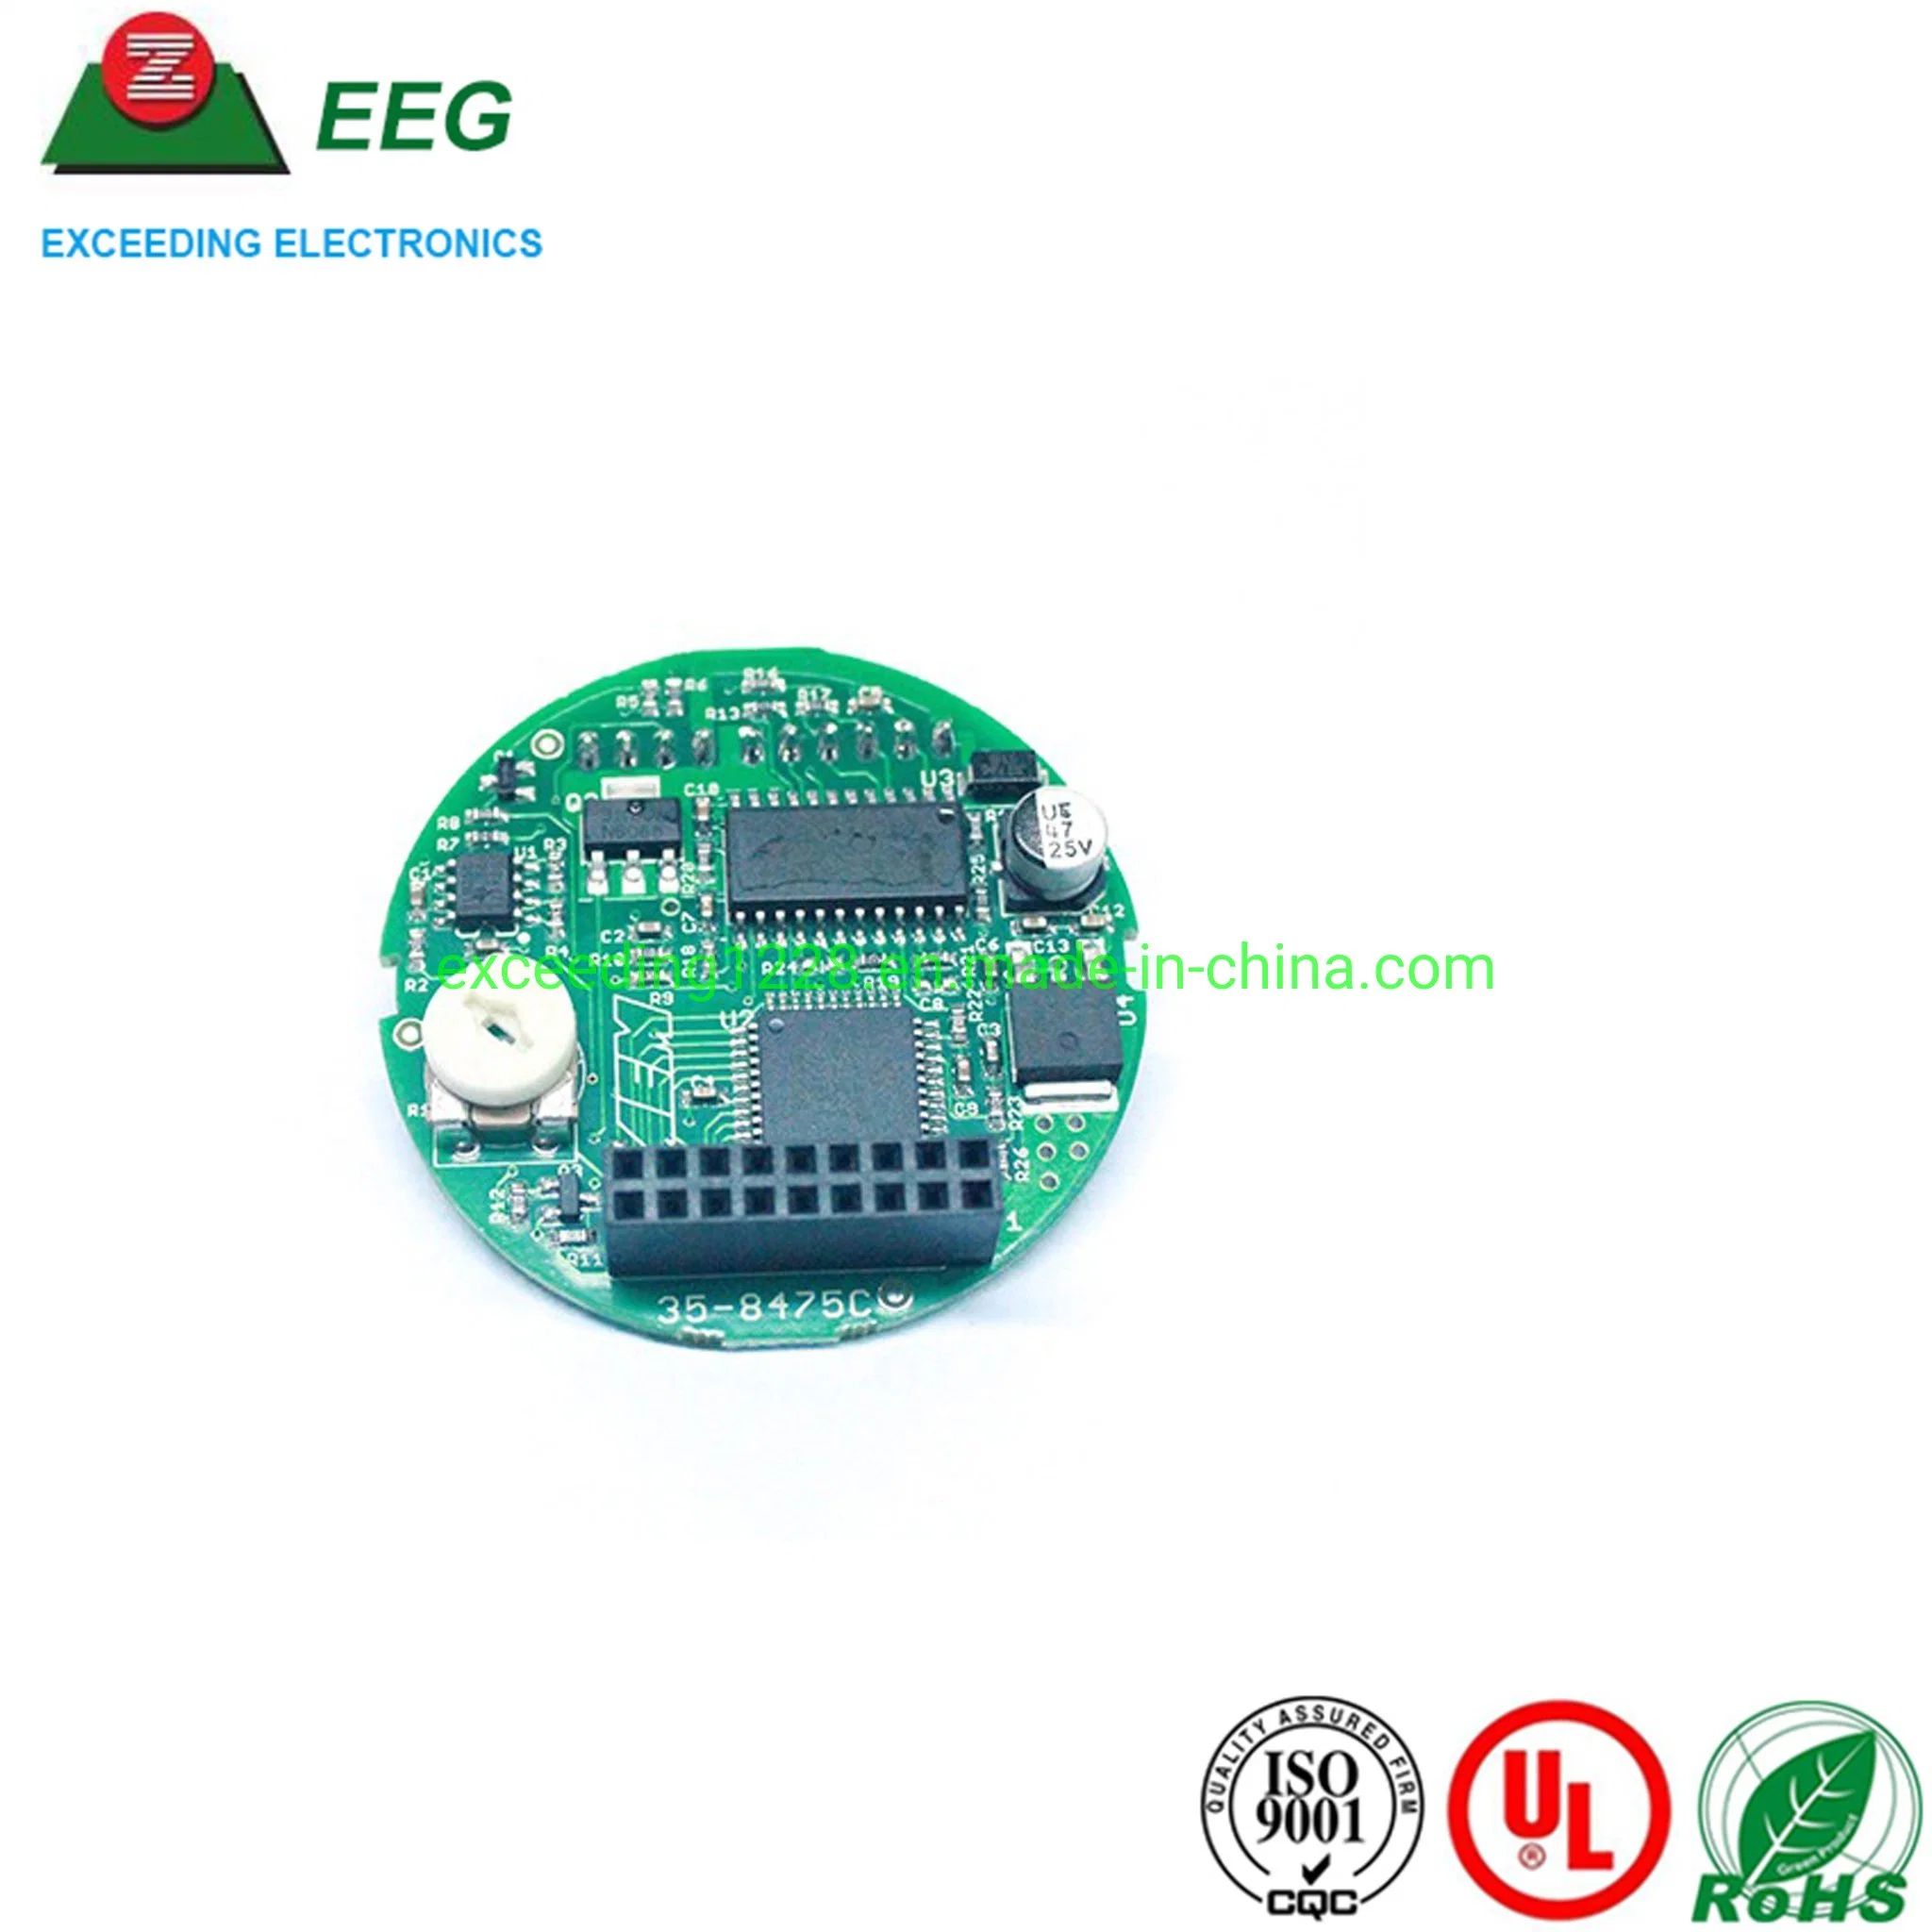 One-Stop Electronics Components Souring Service PCB Fabrication Assembly PCBA Manufacturing